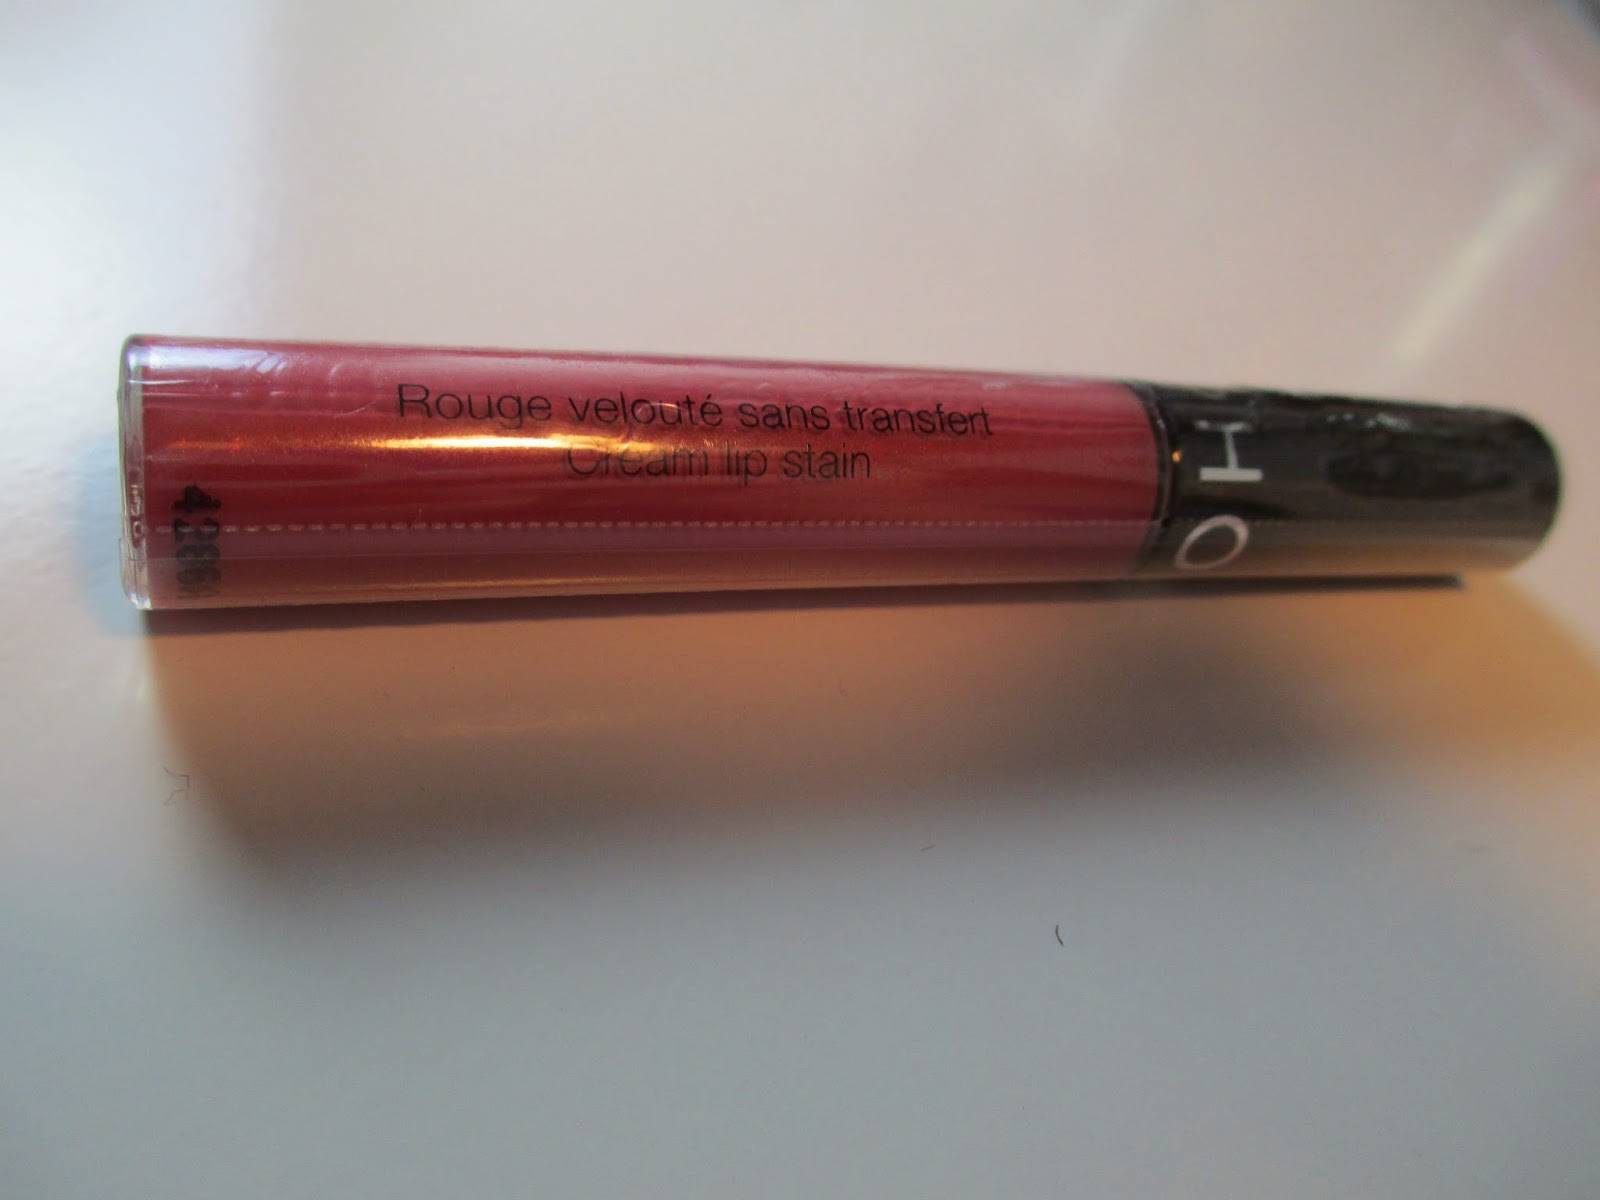 Sephora Pink Souffle Cream Lip Stain: Review & Swatches